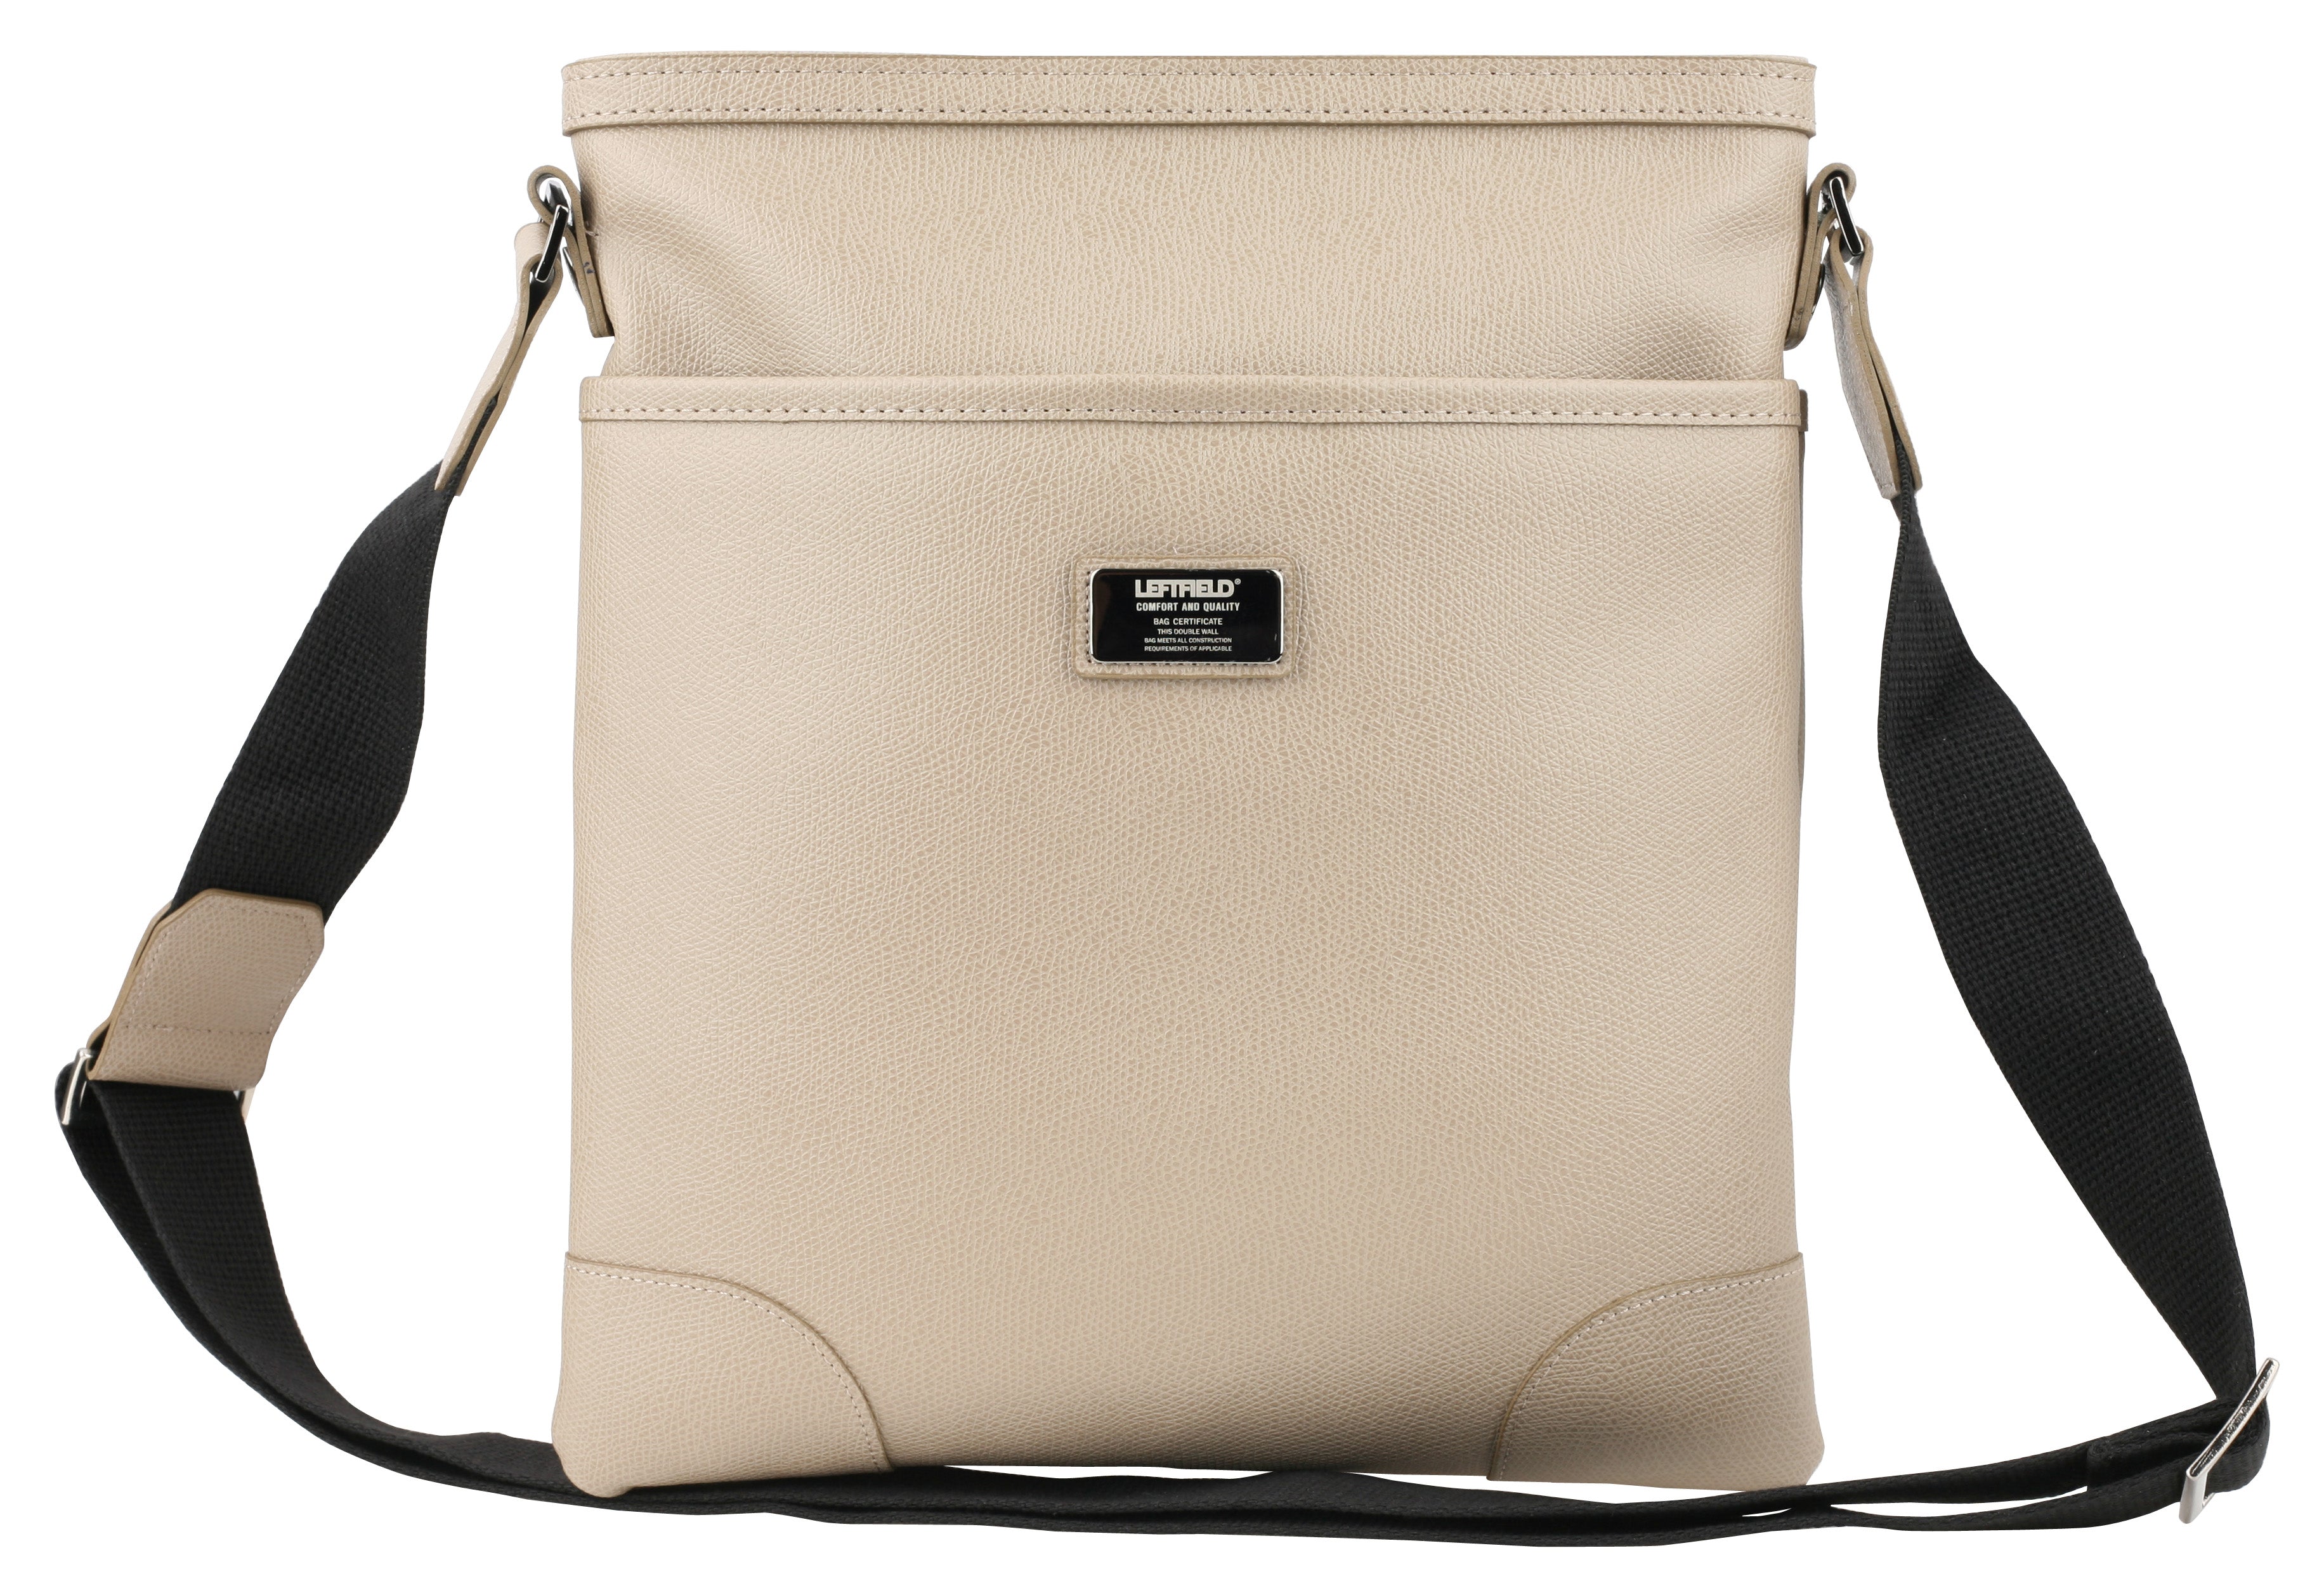 Beige Synthetic Leather Cross Body Bags